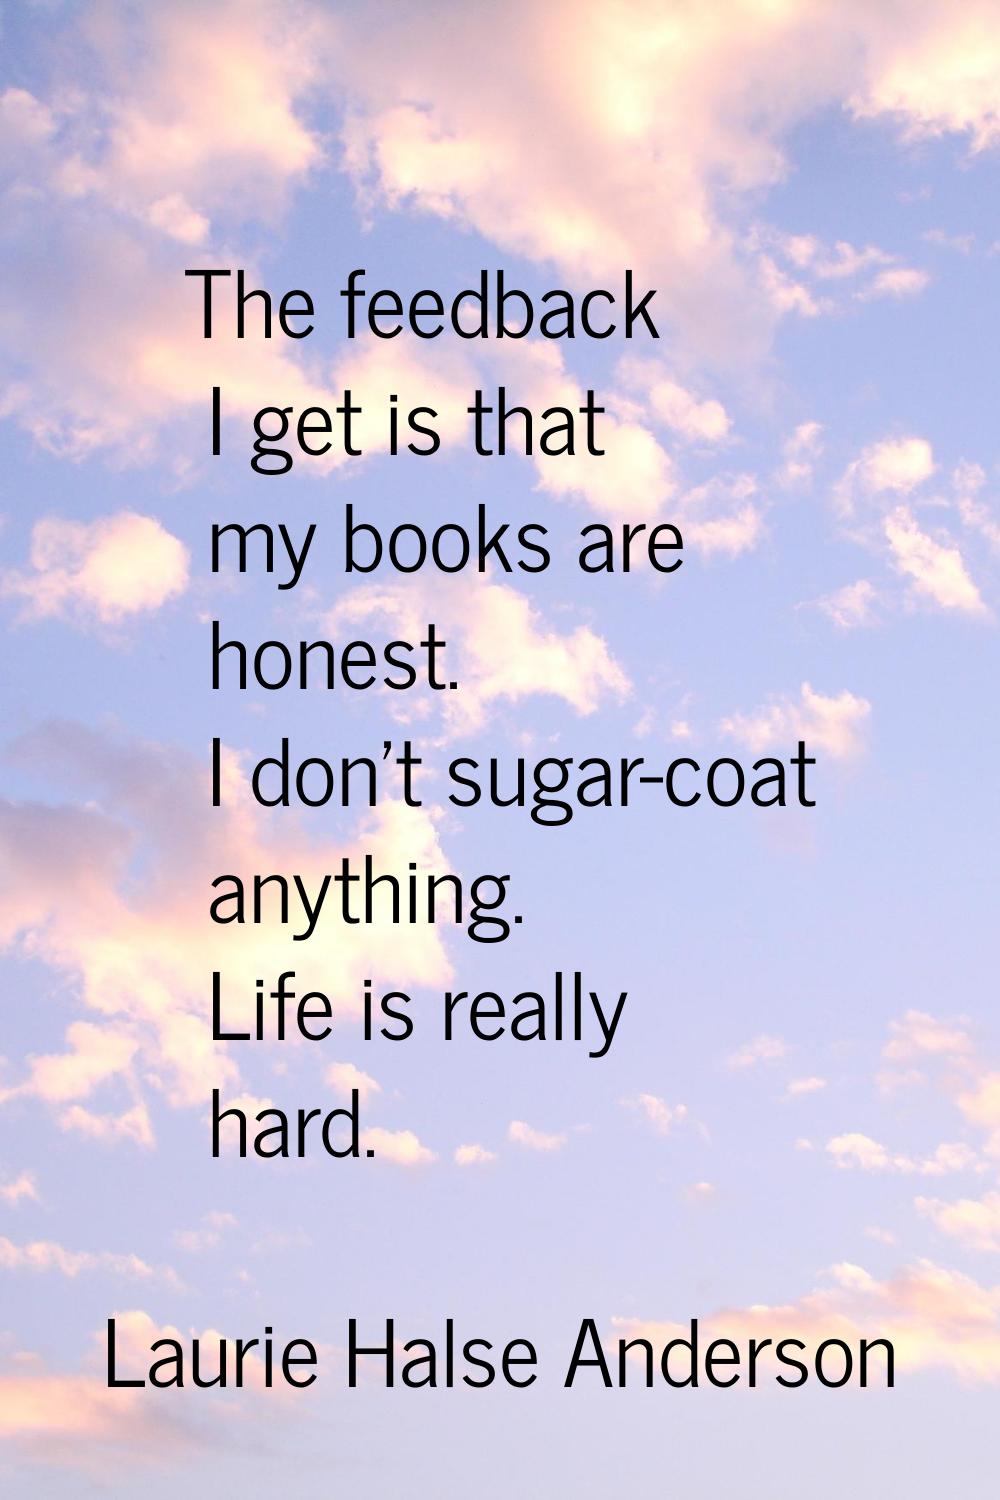 The feedback I get is that my books are honest. I don't sugar-coat anything. Life is really hard.